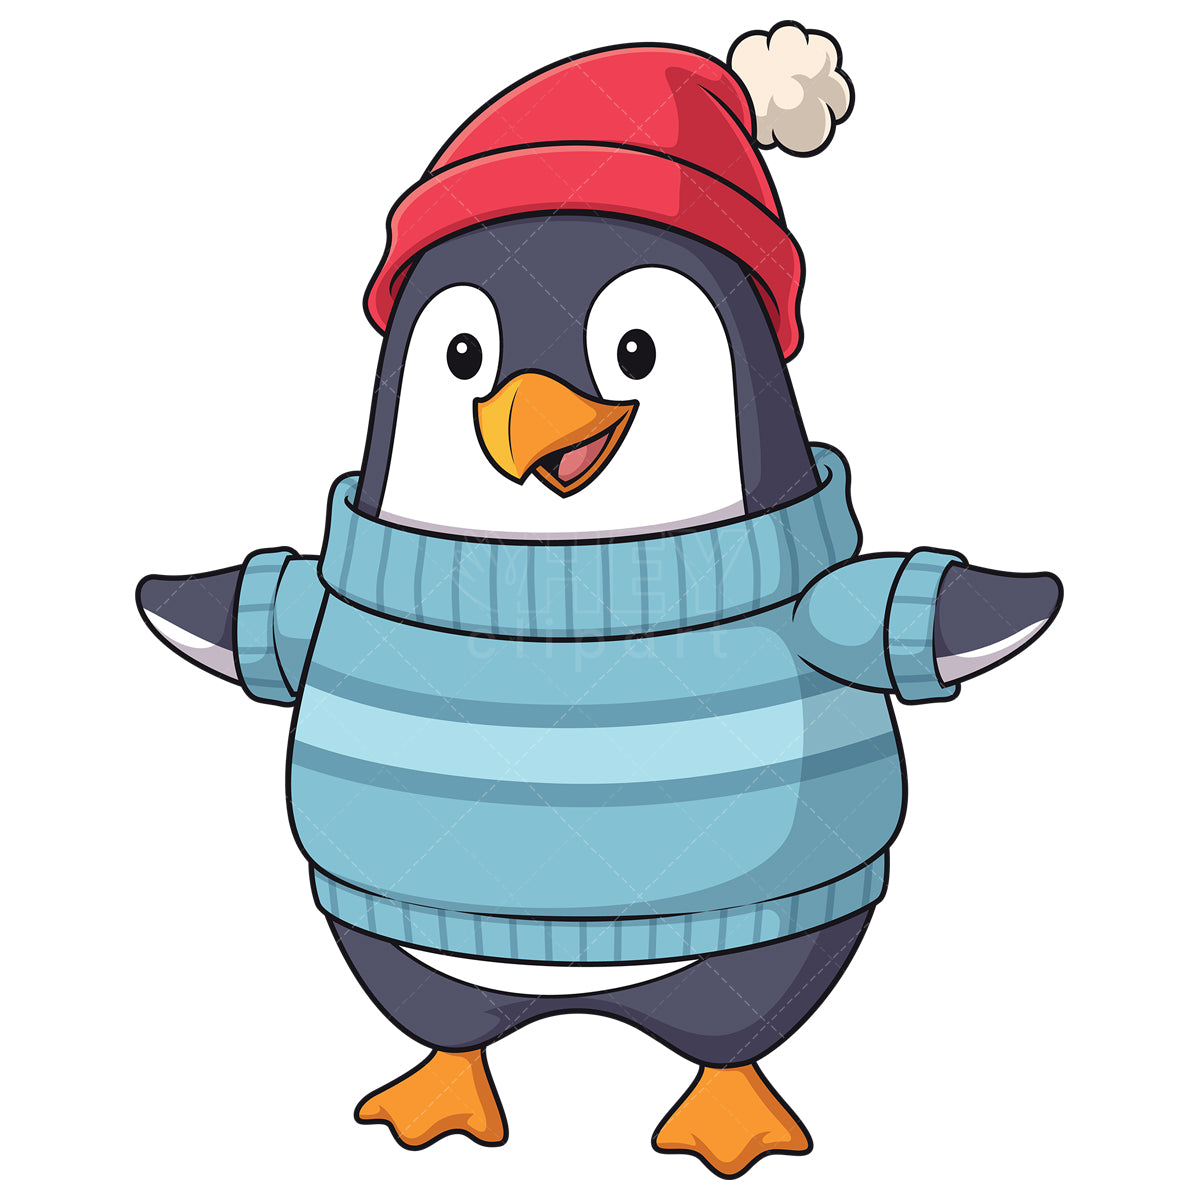 Royalty-free stock vector illustration of a cute winter penguin.